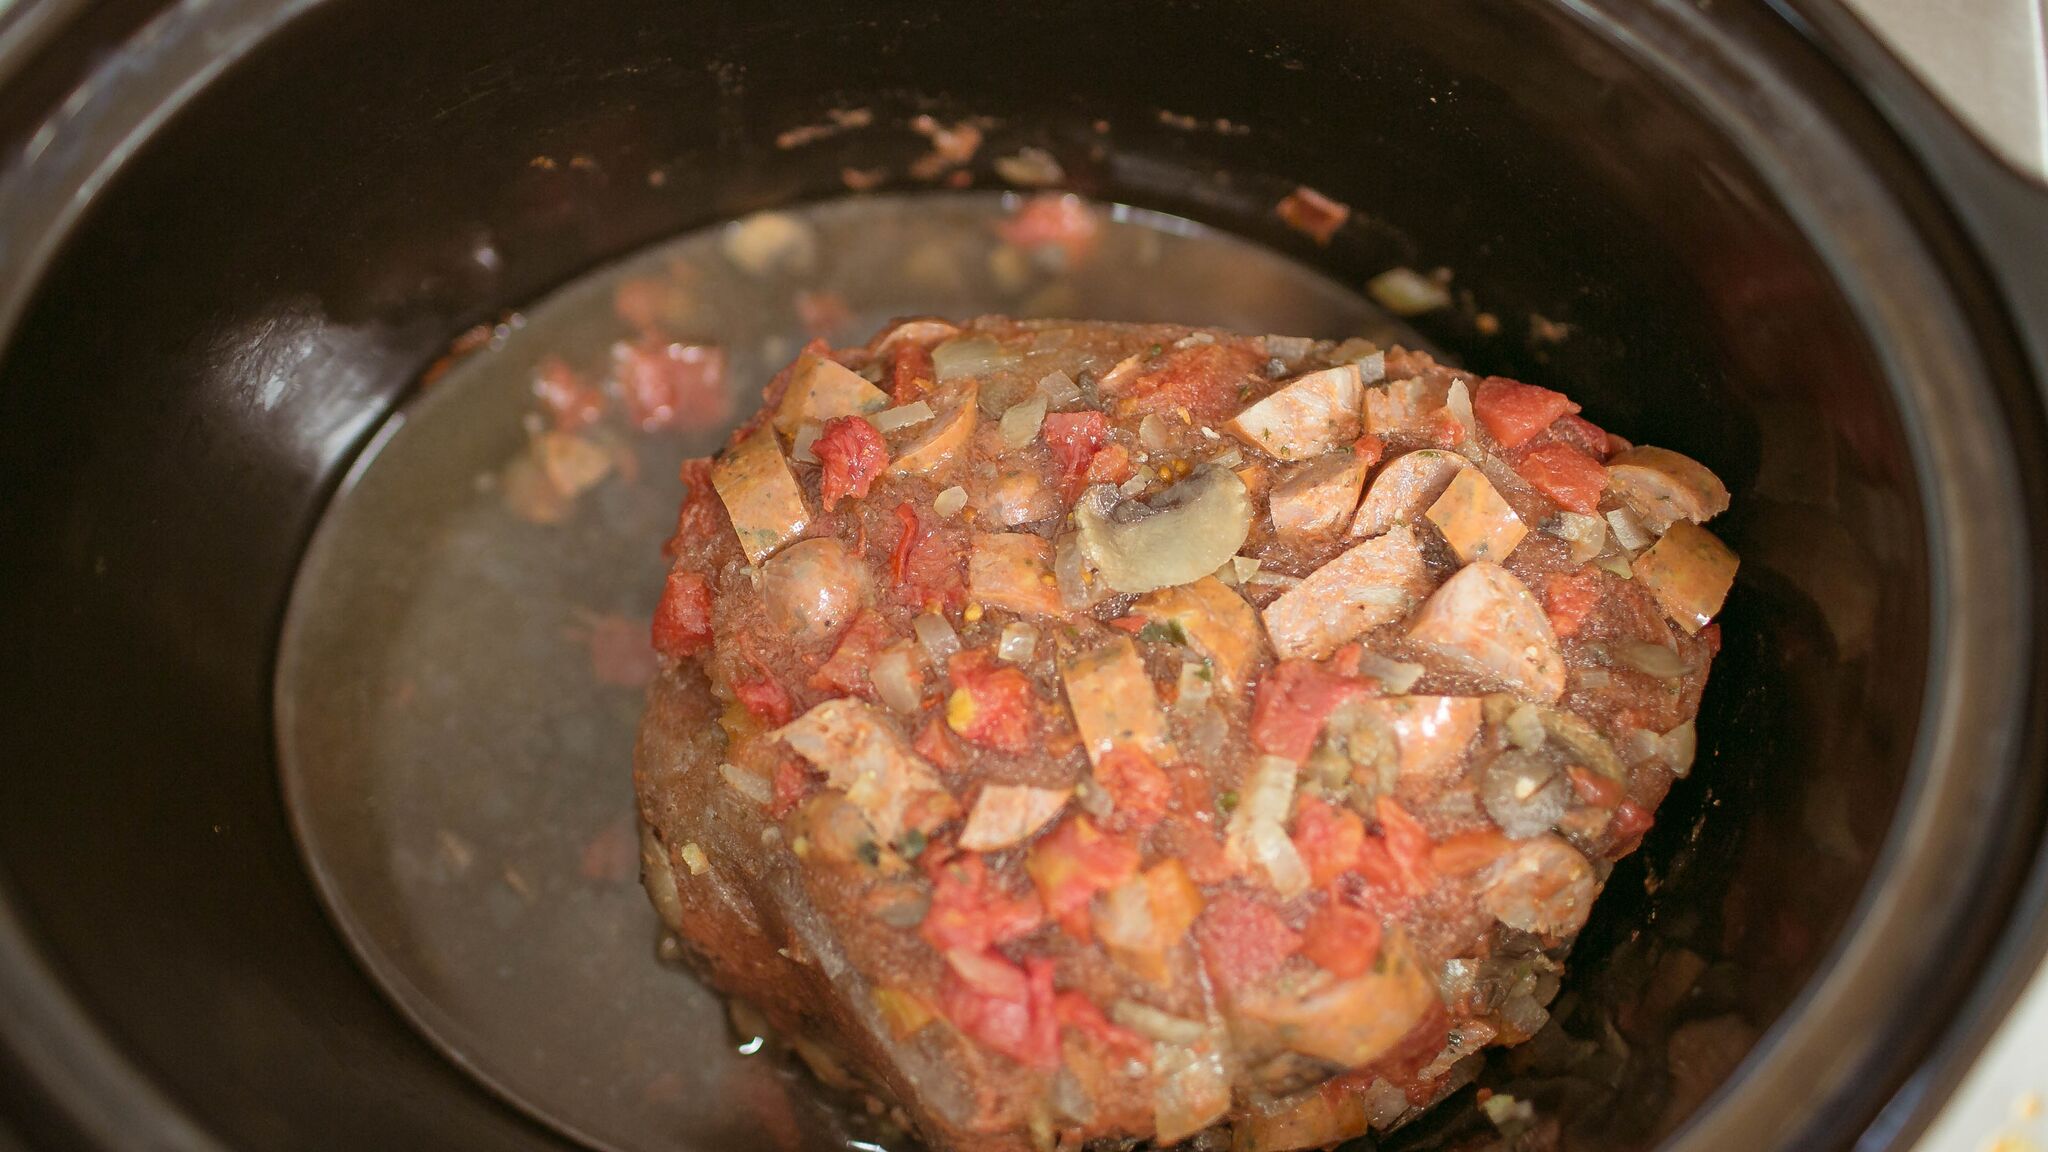 On cooking day, place frozen mixture directly into slow cooker. 